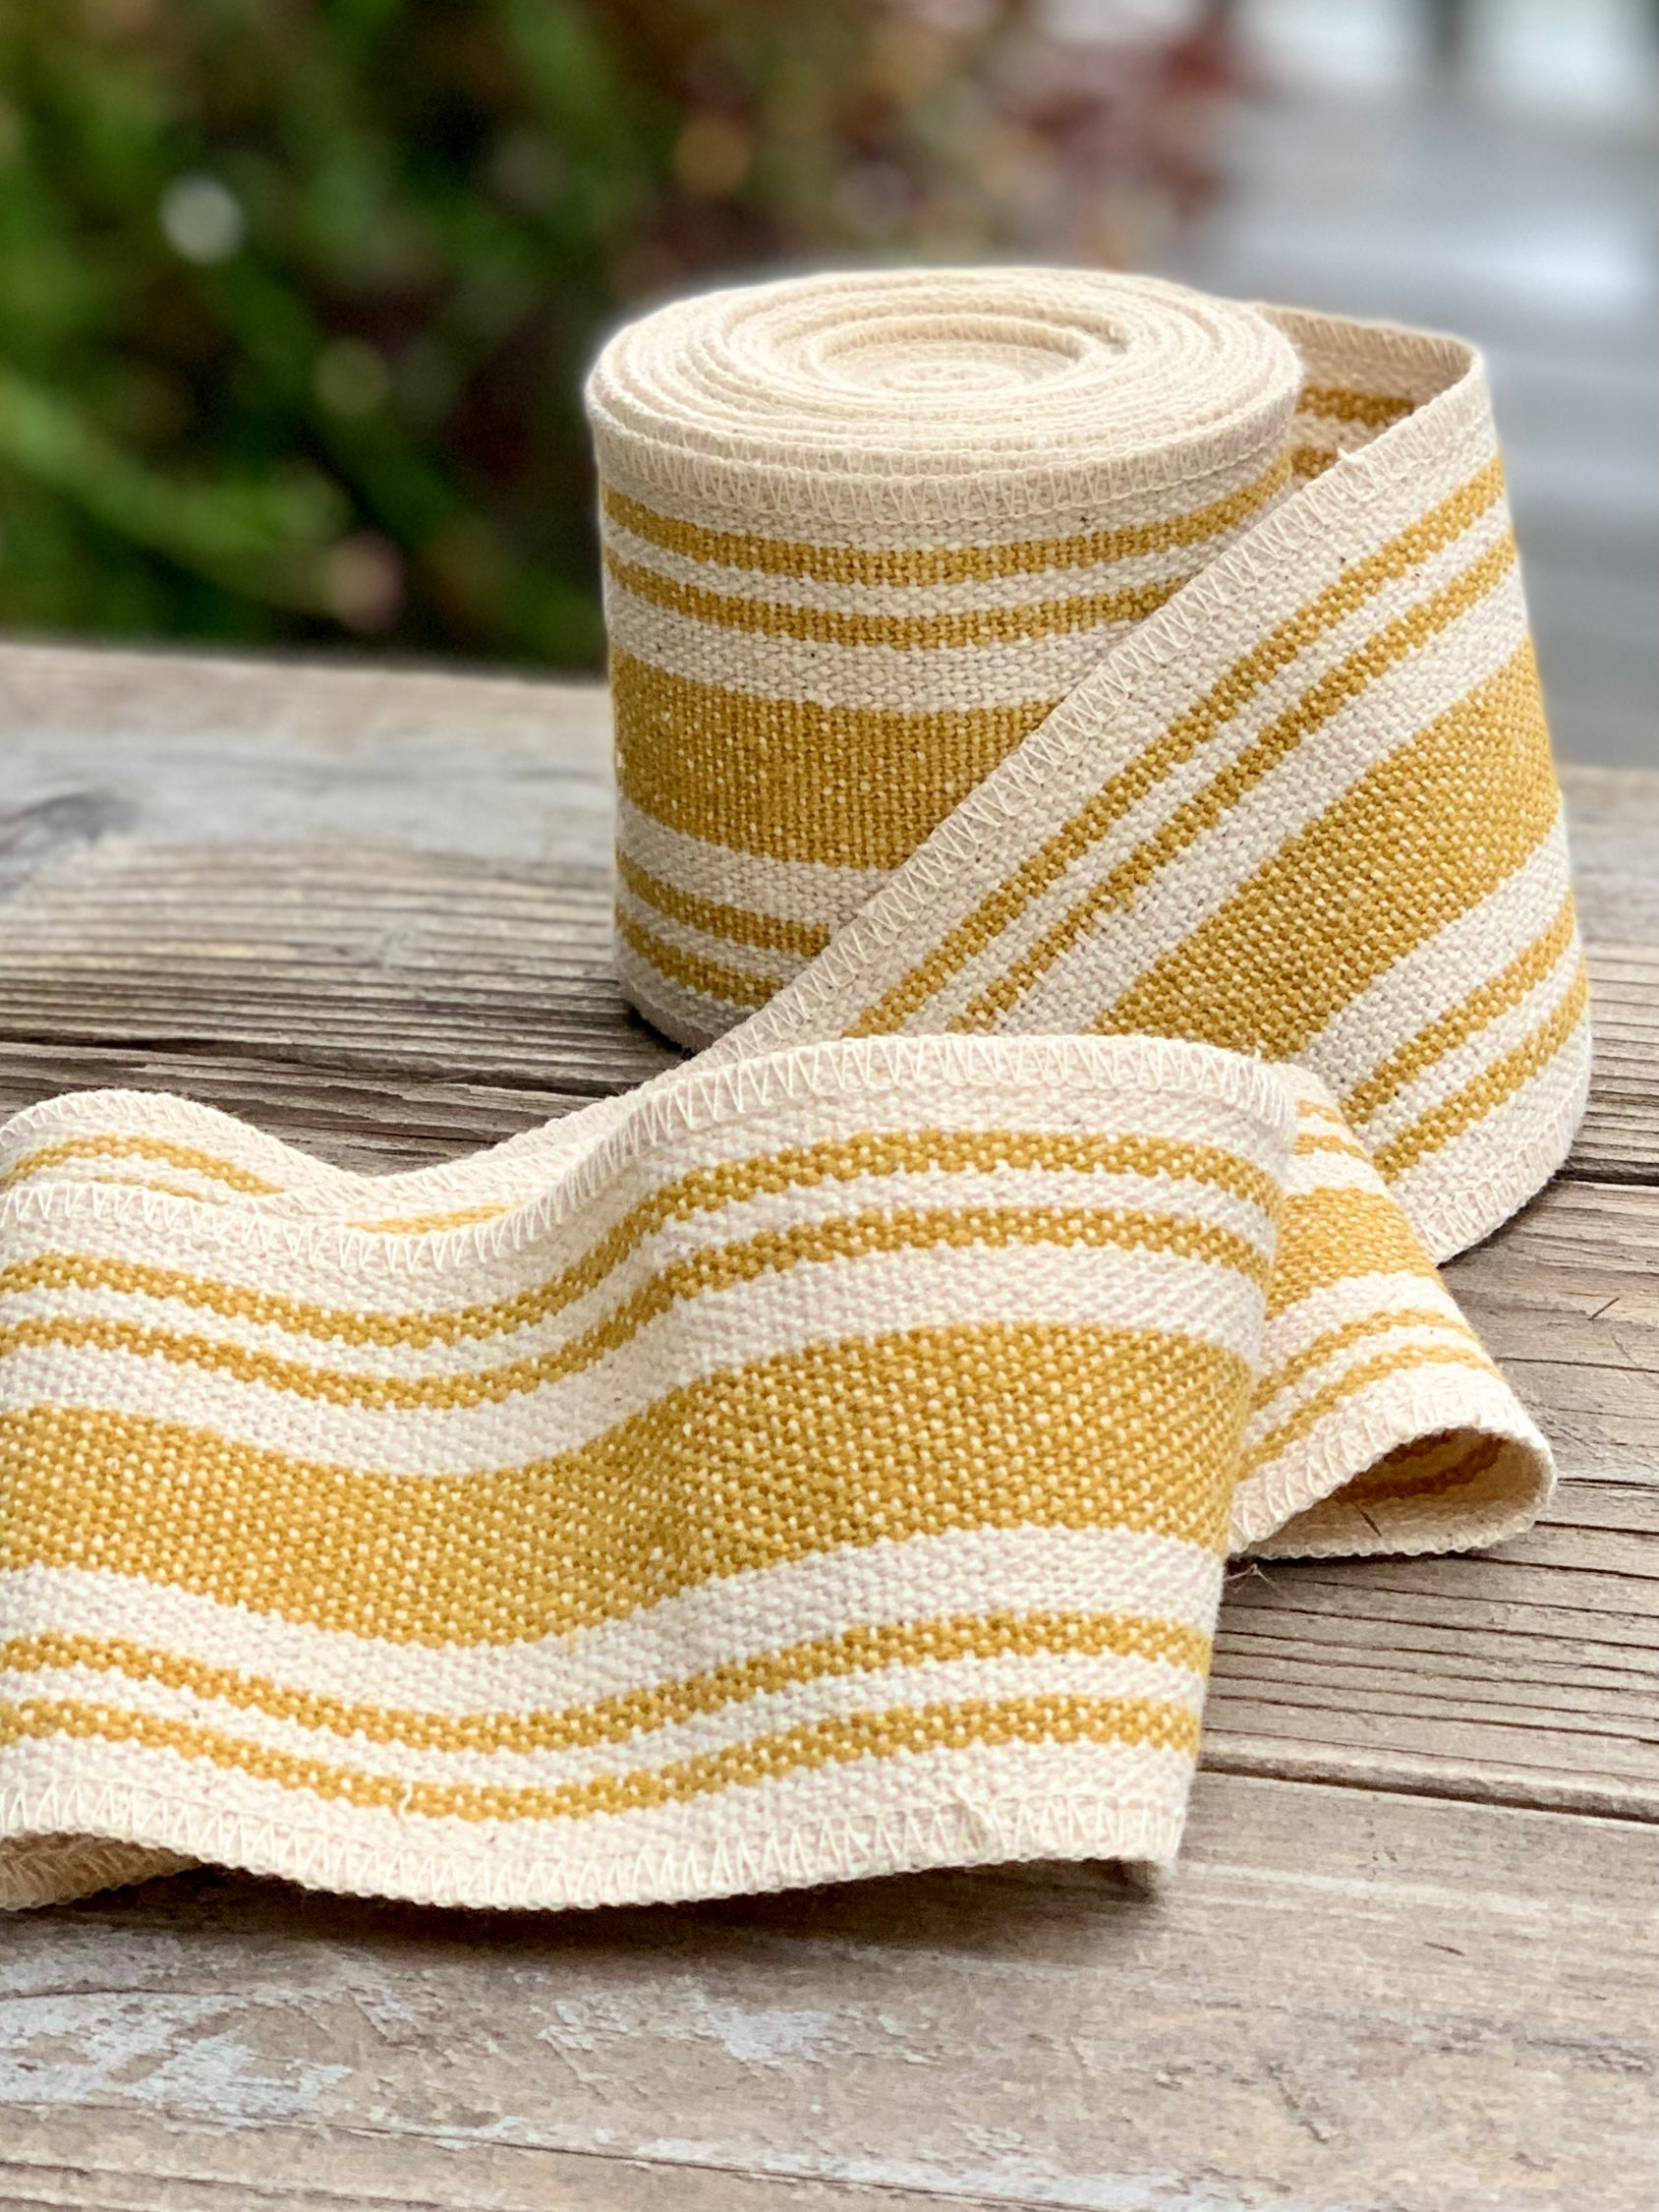 Grain Sack Ribbon - Butter Yellow and Cream - 3" Wide